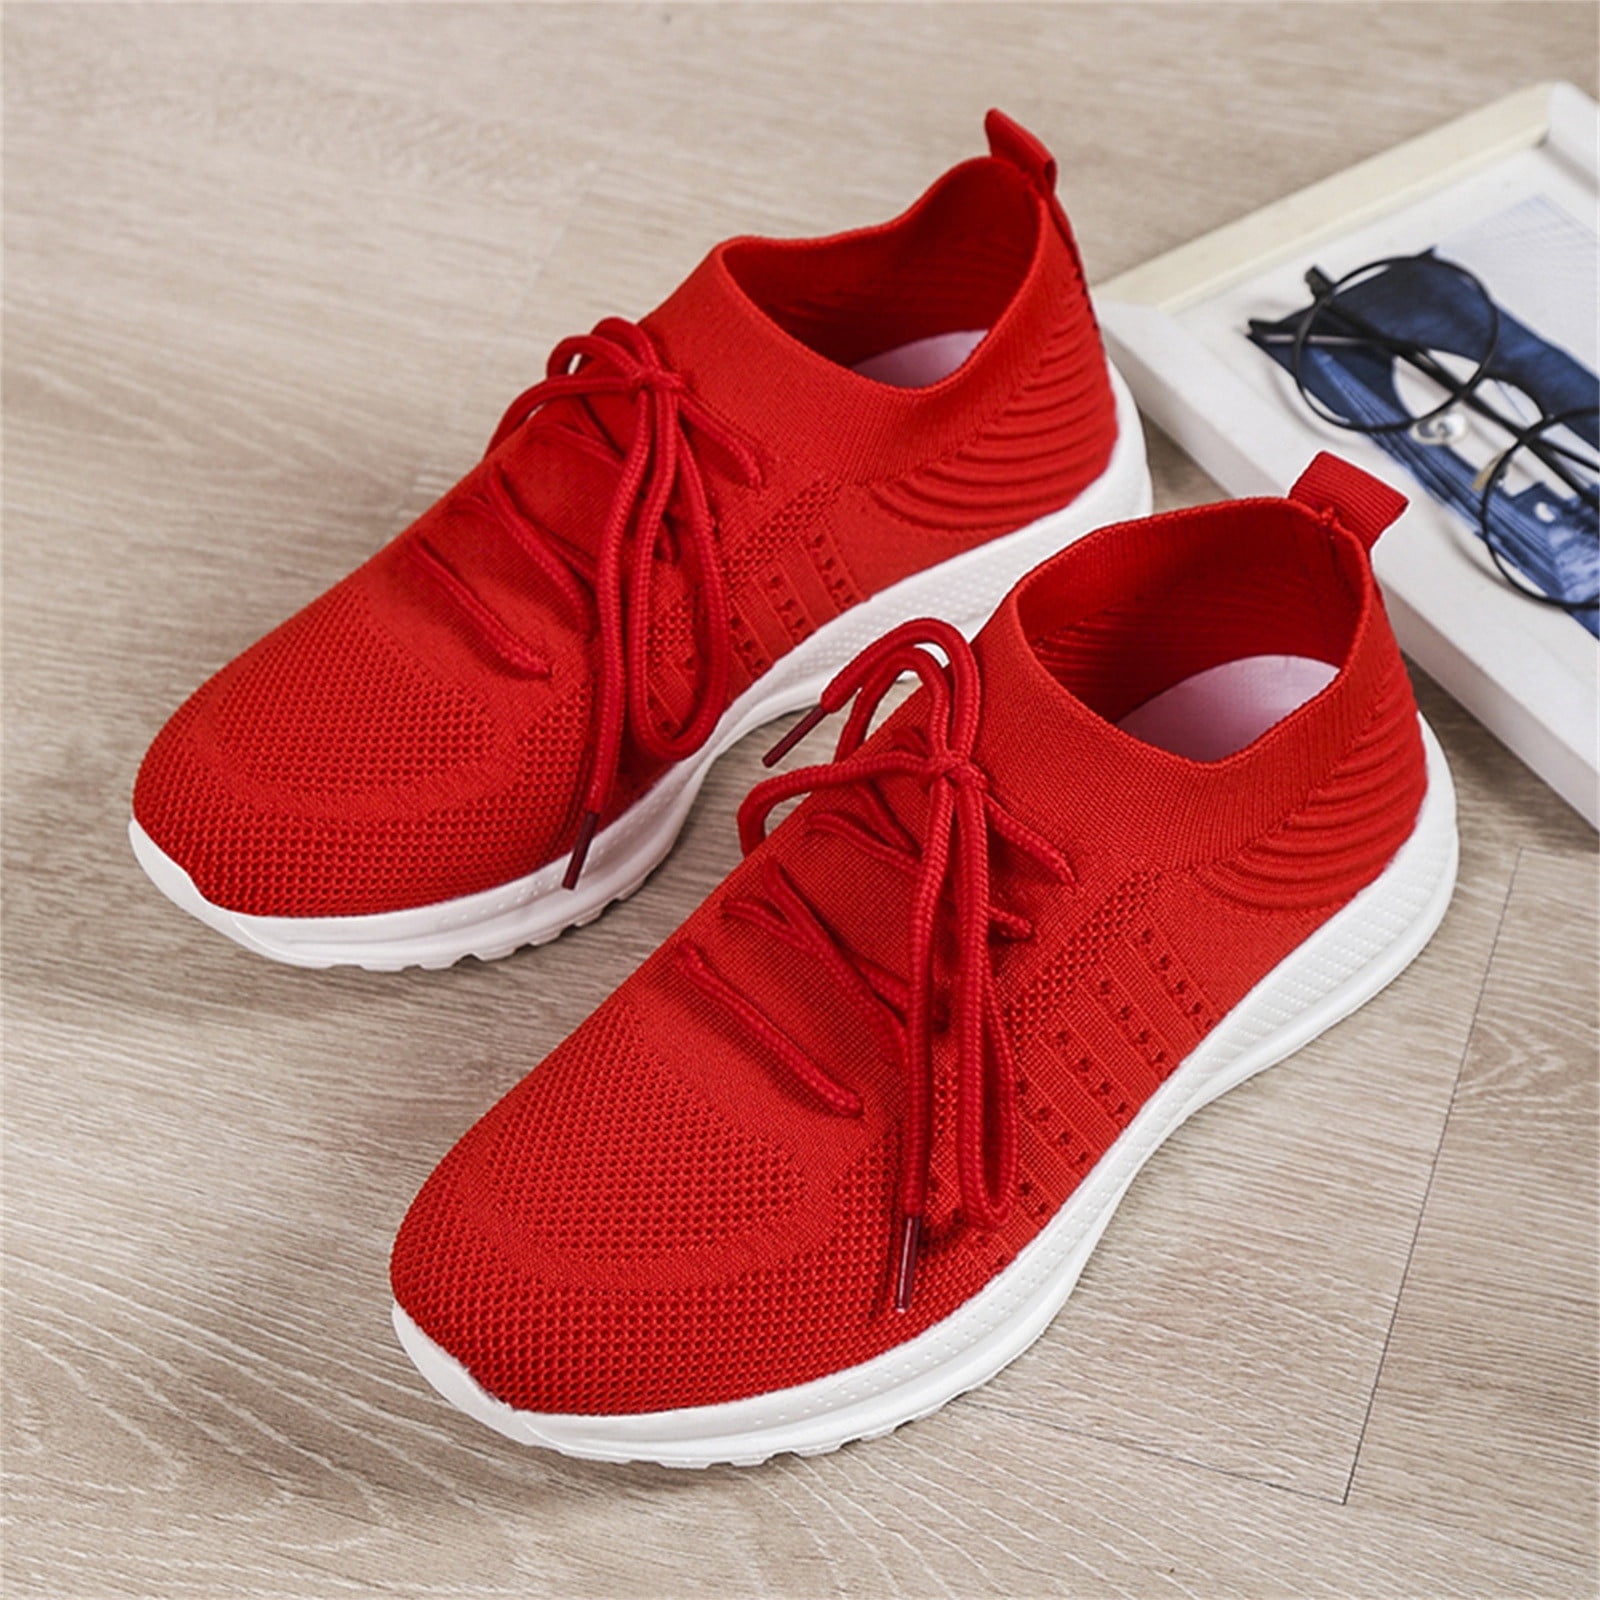 Nature Breeze Lace Up Women's Canvas Sneakers in Red - Walmart.com